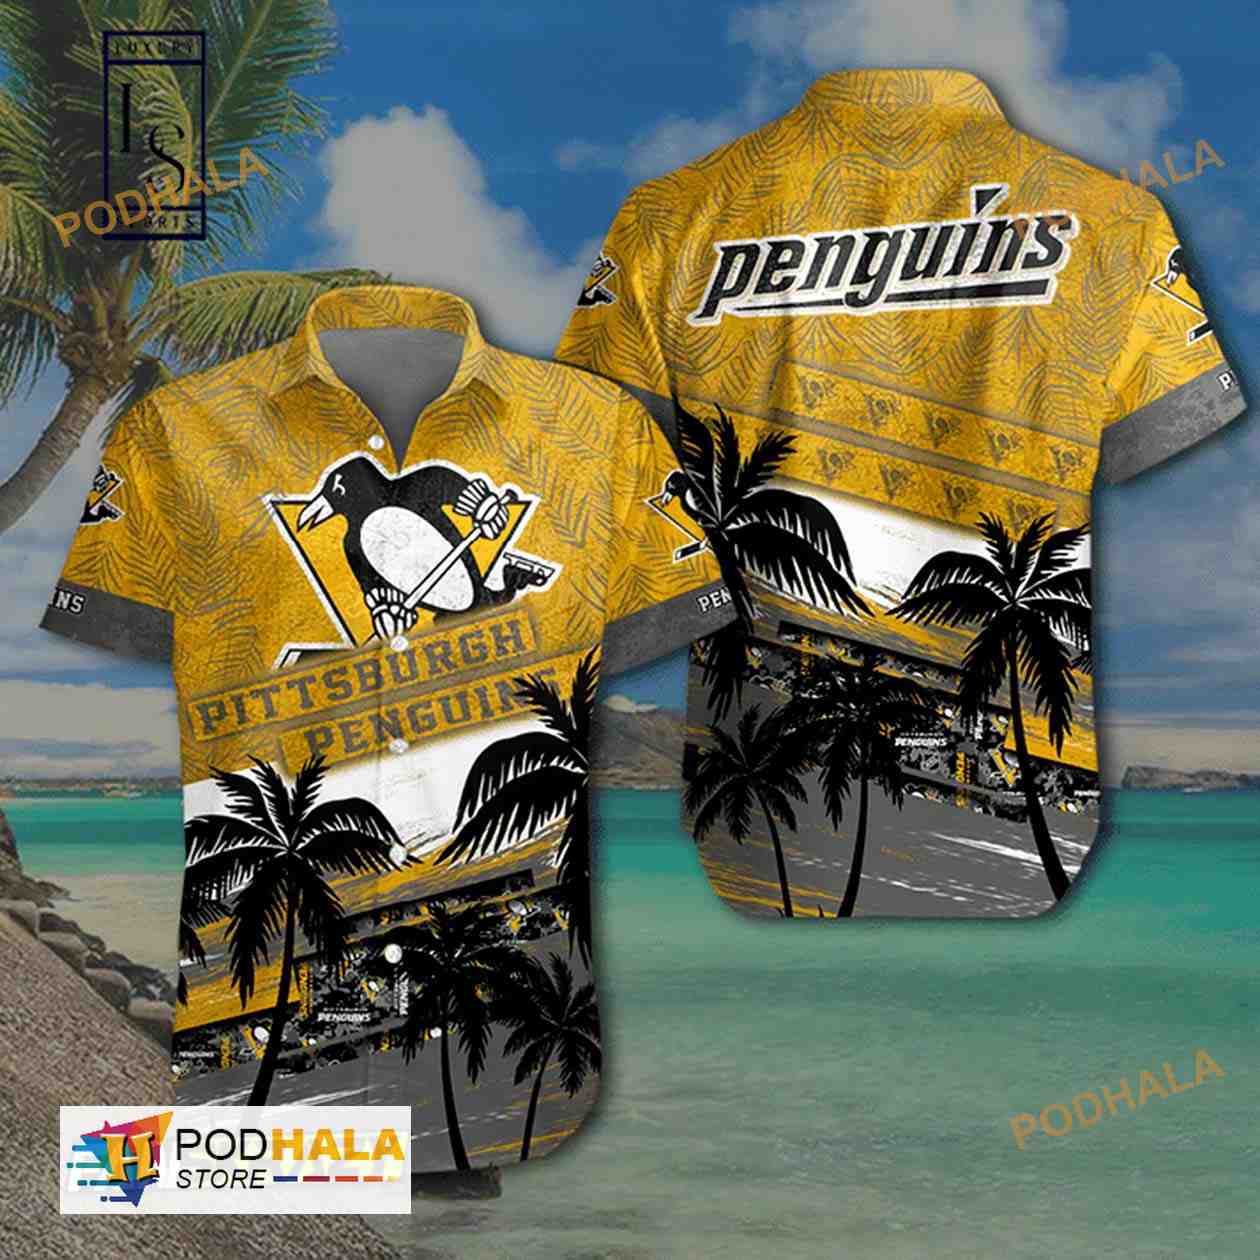 Show Your Love for the Pens: The Perfect Pittsburgh Penguins Gift